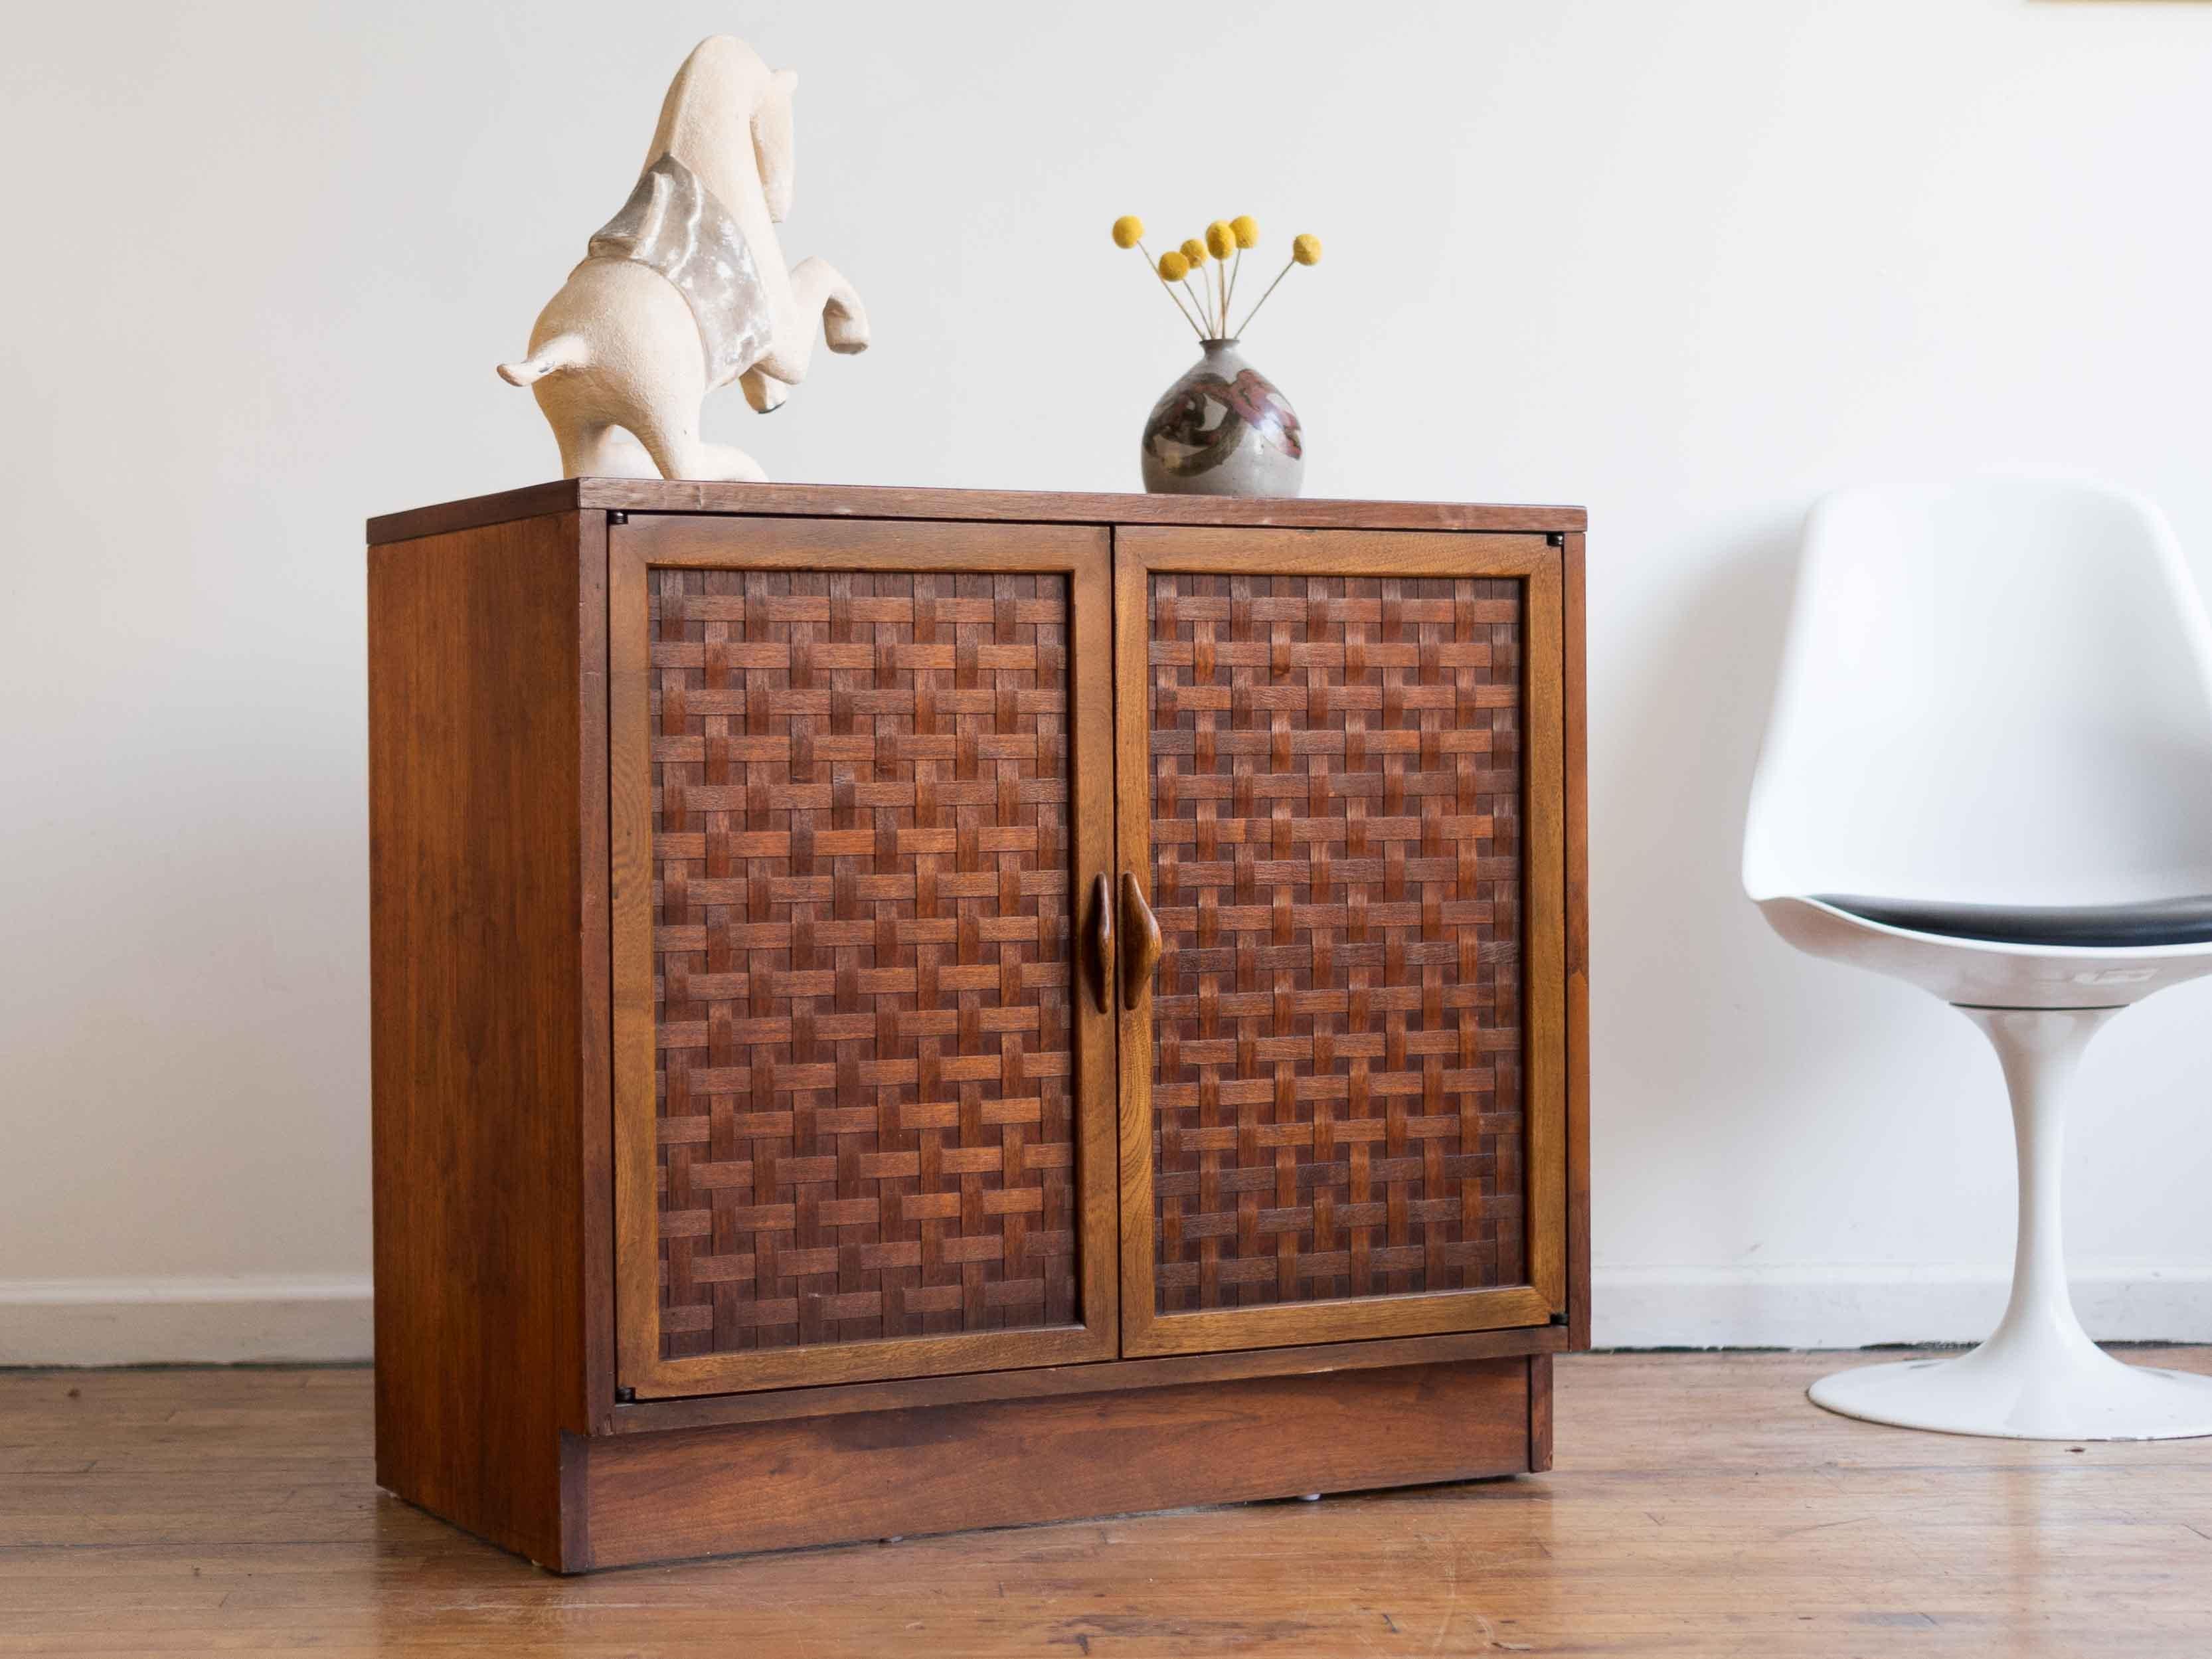 32” x 17.5” x 29”H

Petite Lane Perception storage cabinet that works great as a buffet, entry table, or record storage. Features the line's signature basketweave doors and rounded wood pulls. One fixed shelf. Walnut wood throughout. 

Good vintage